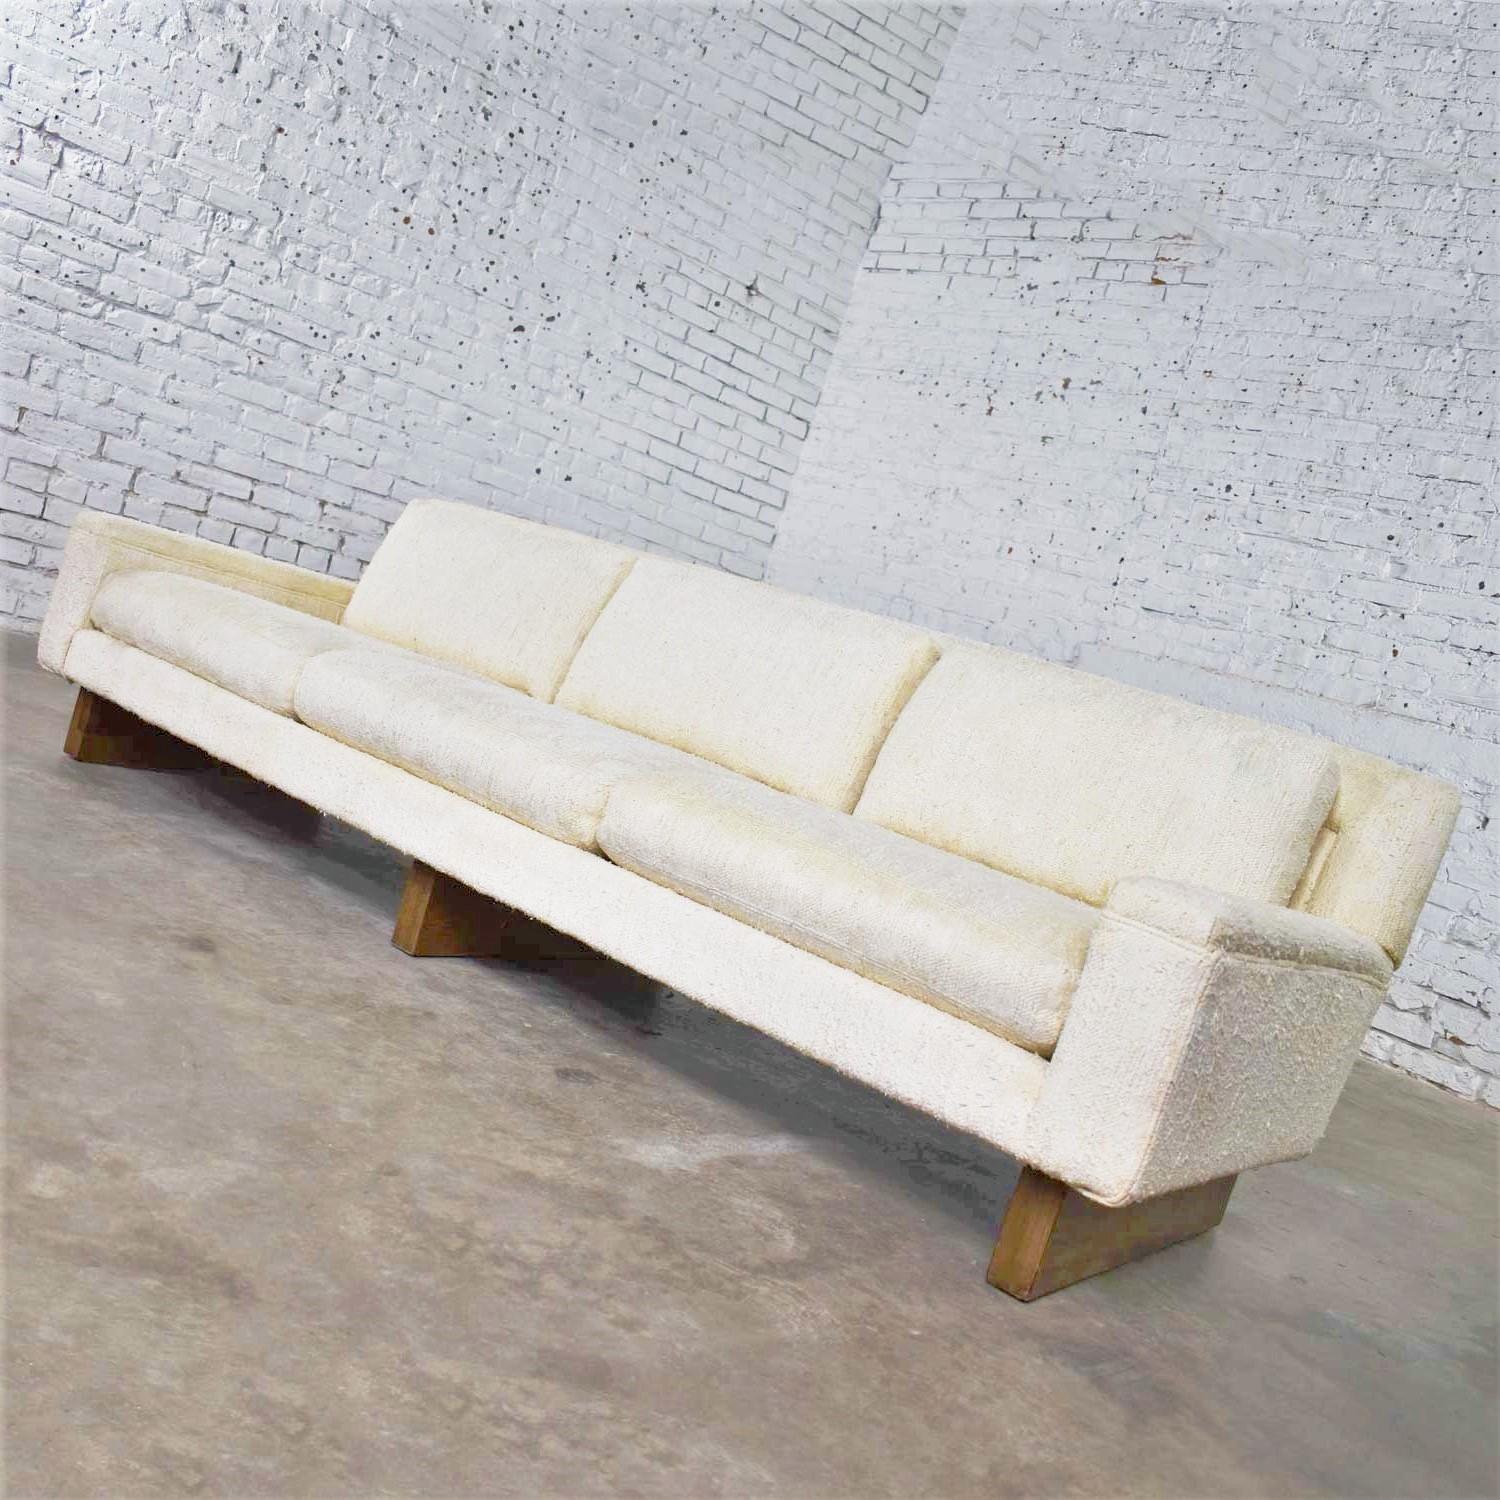 Handsome Mid-Century Modern Lawson style three cushion white sofa from the flair division of Bernhardt Furniture. It is in wonderful vintage condition and wears its original linen-like white nubby fabric. It has been professionally cleaned. However,